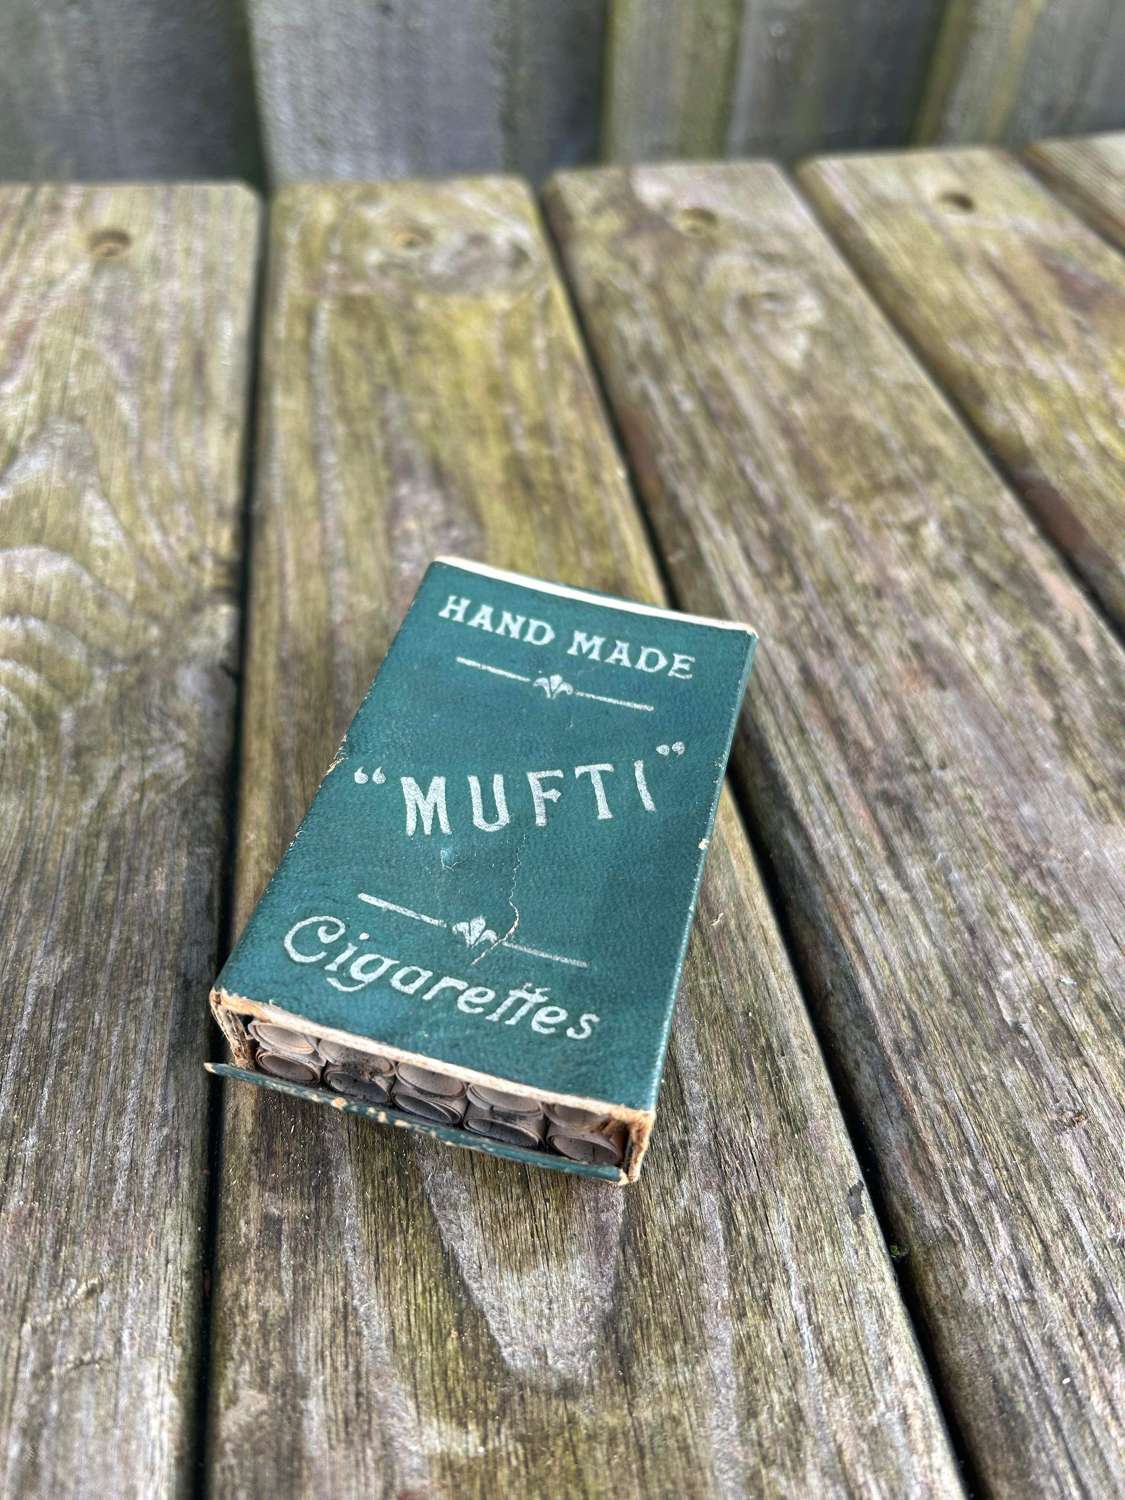 Early live lambert and butler cigarette packet